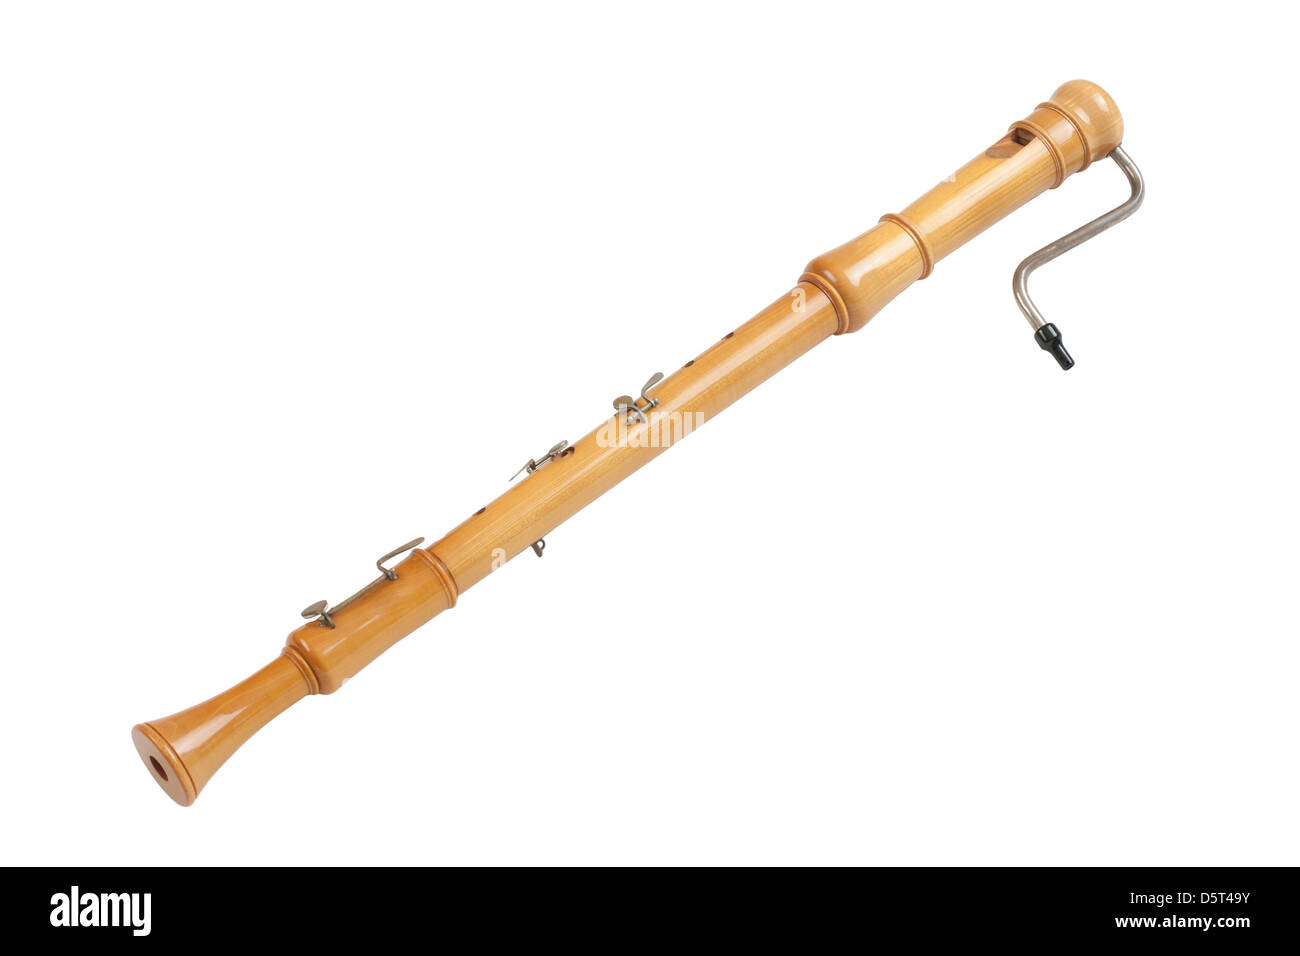 Sweet sound from wooden music instrument, wooden recorder Stock Photo